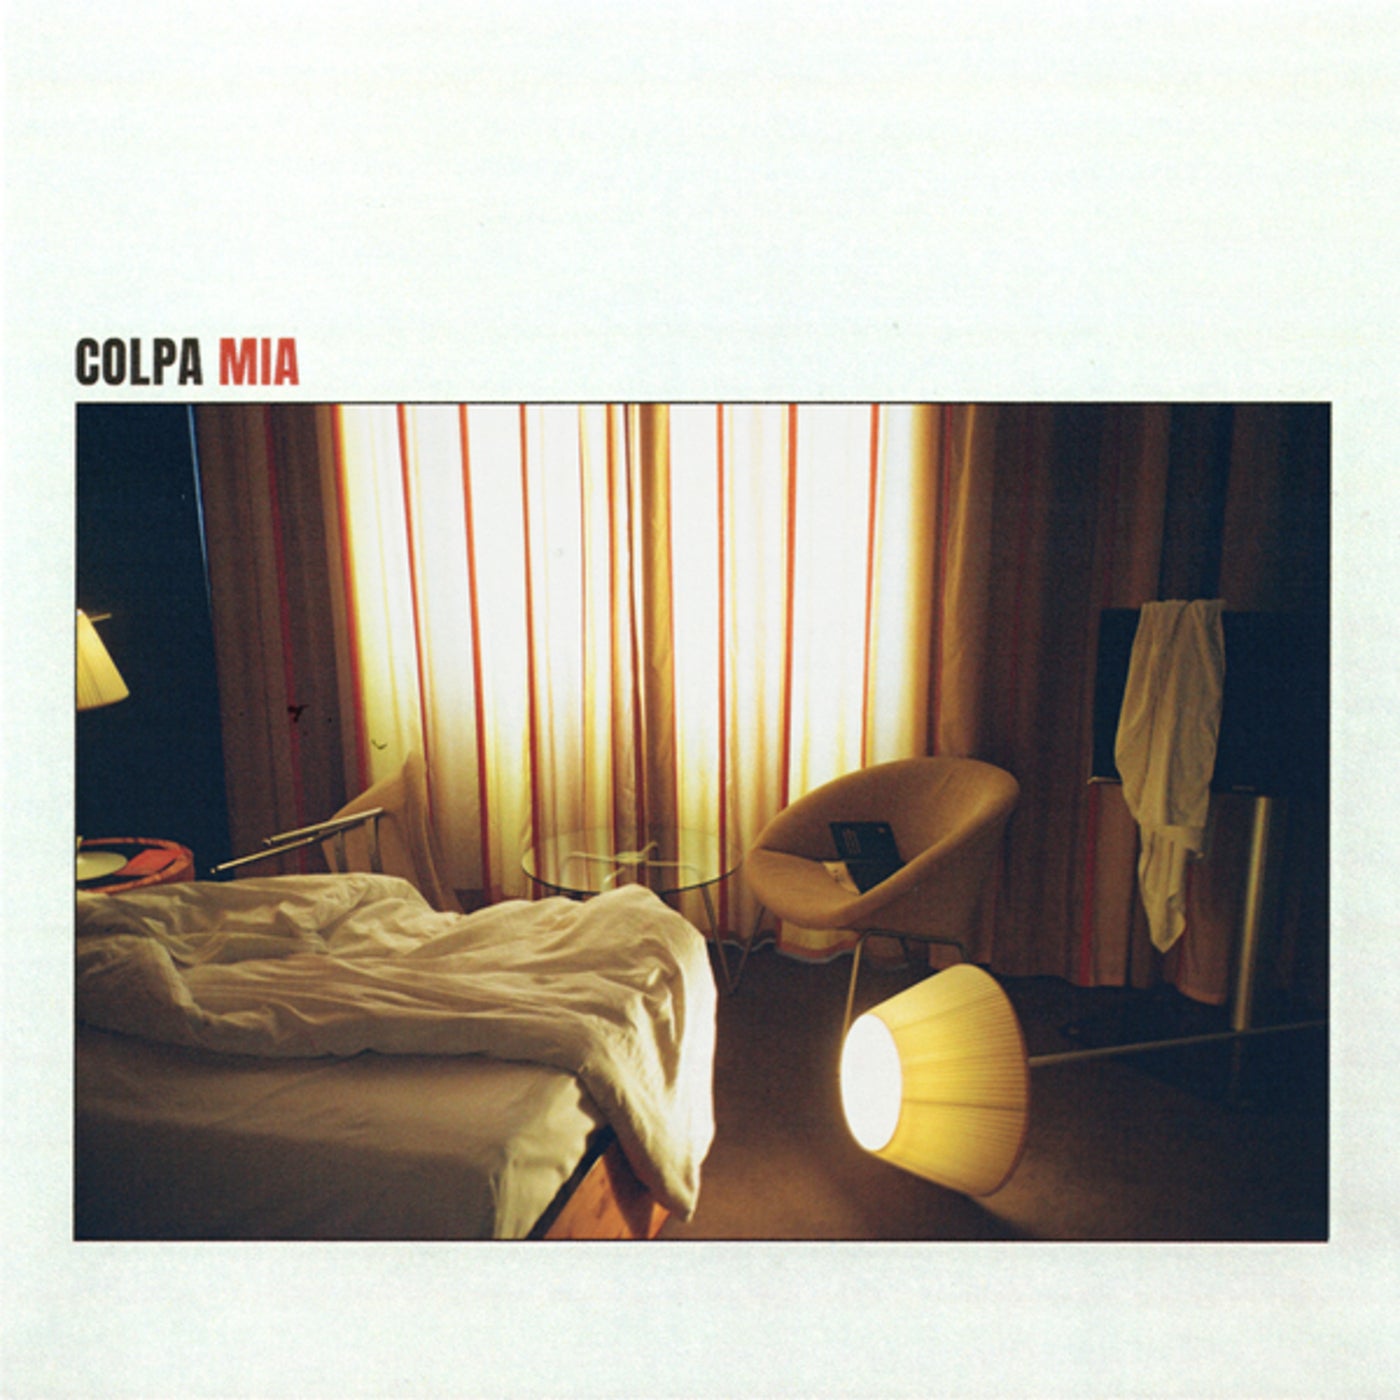 colpa mia by Mancha and Still Charles on Beatsource